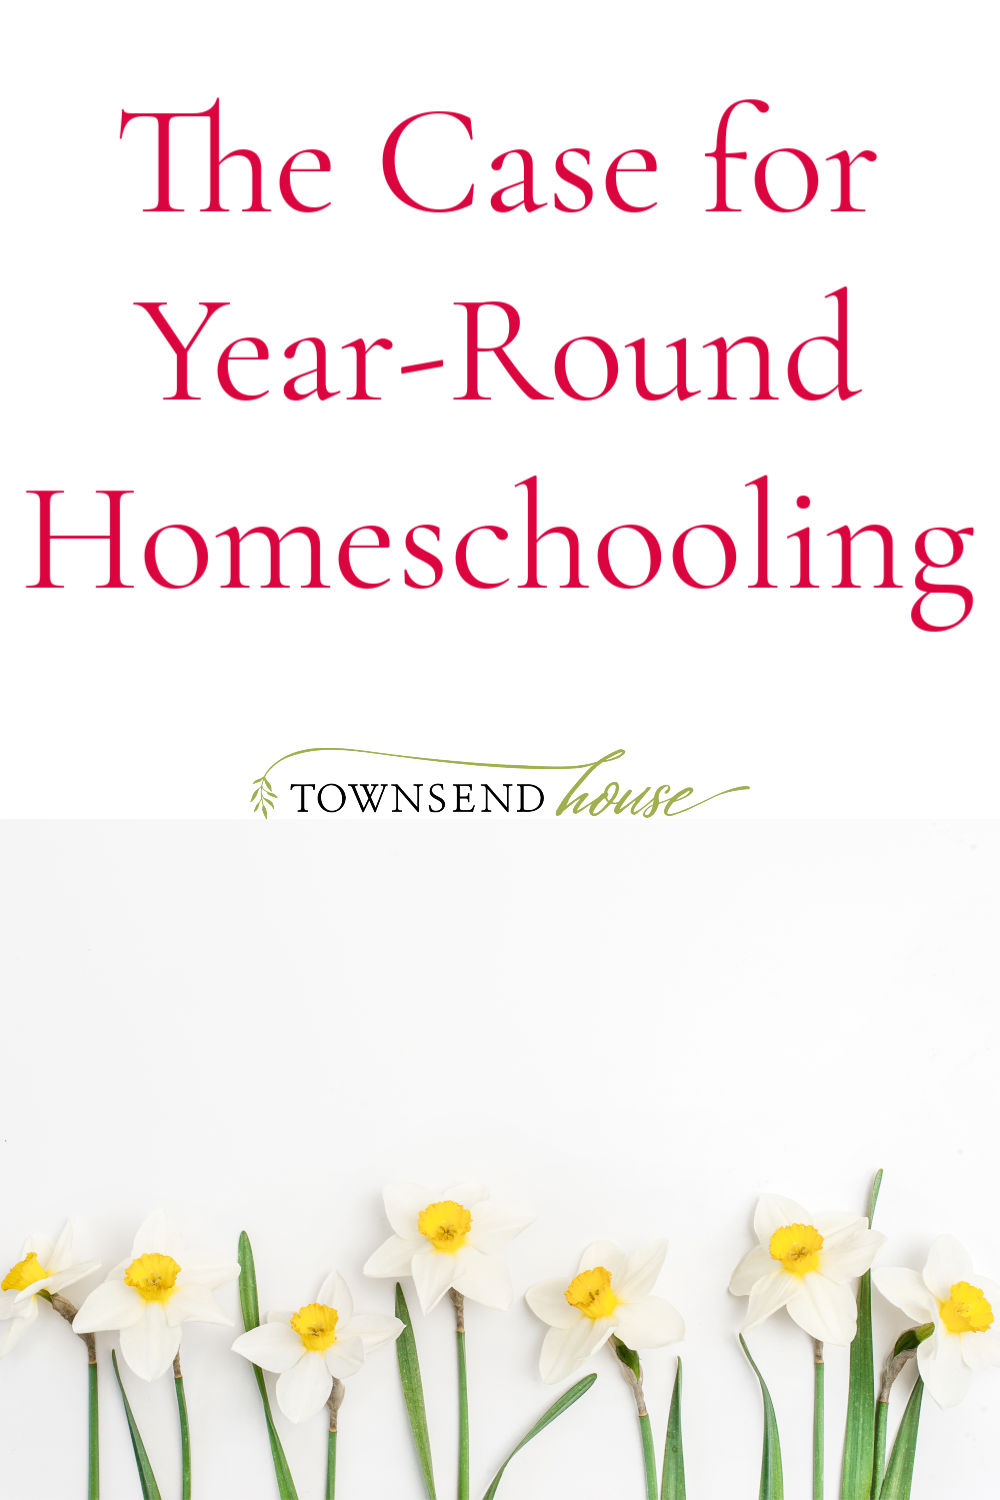 The Case for Year-Round Homeschooling